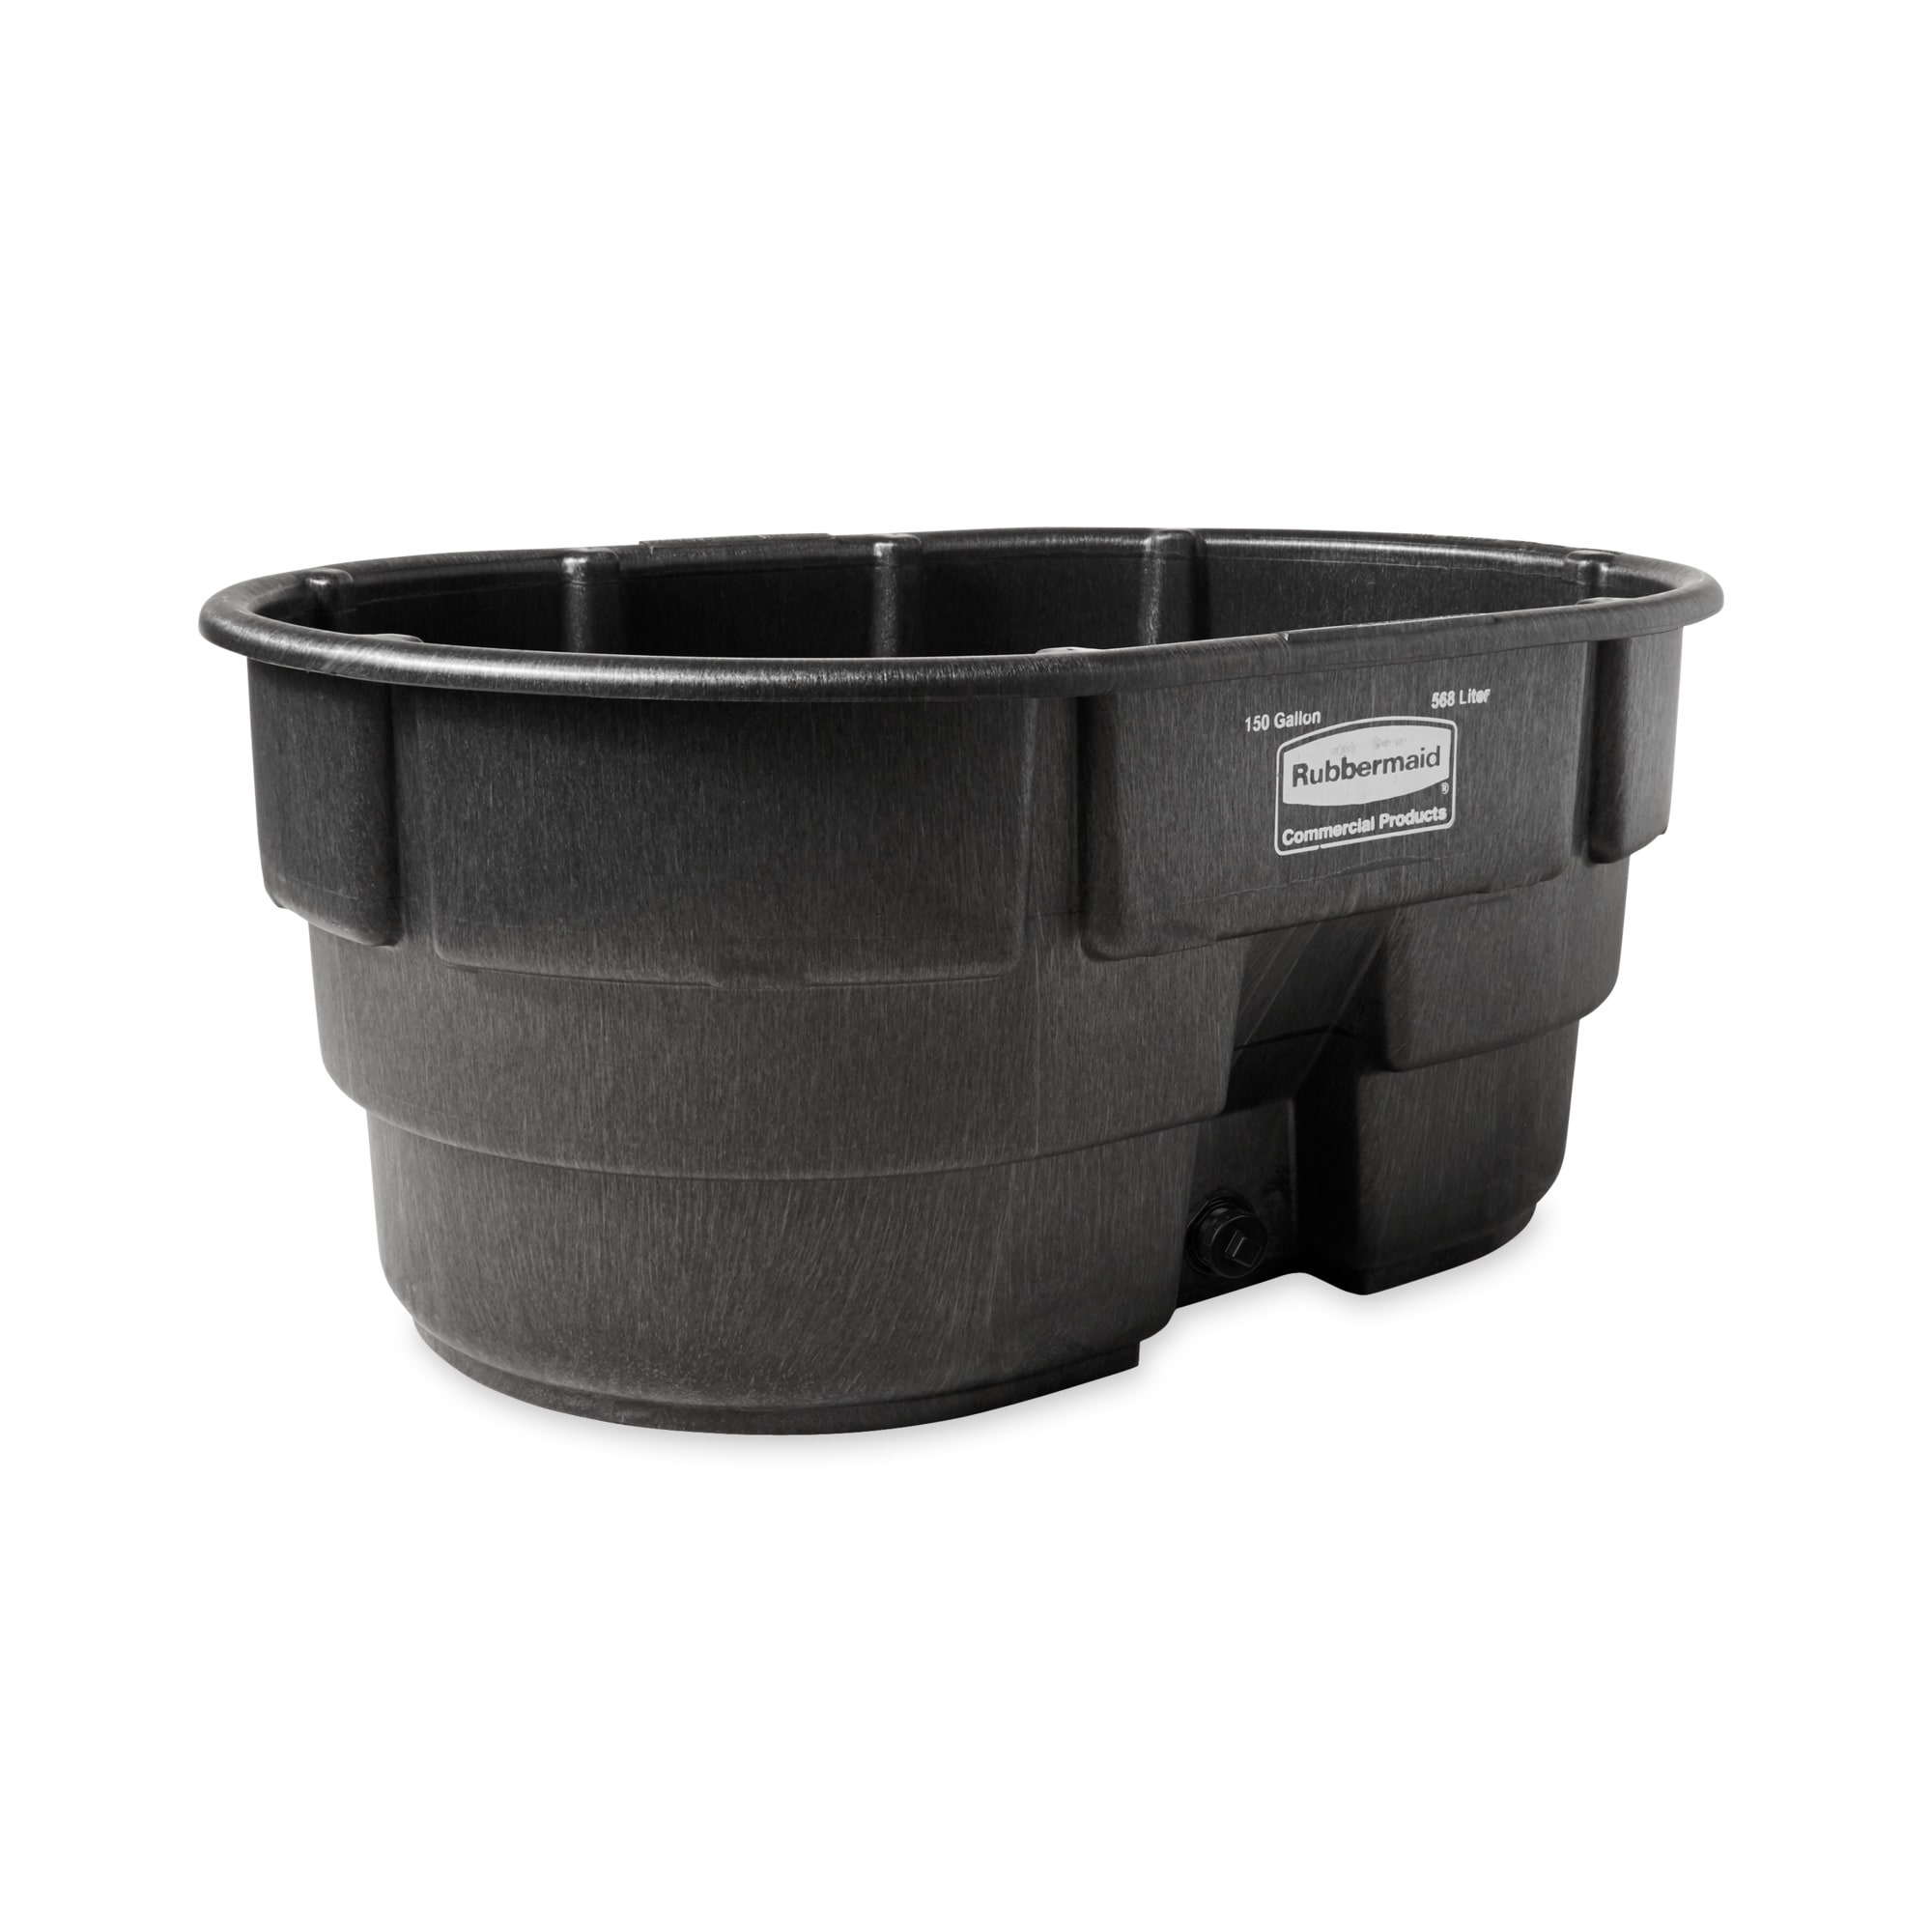 Coastal Farm & Ranch - Hot Deal Alert! Through August 17th, Save $150 on  the 300 Gallon Brute Stock Tank from Rubbermaid. The durable structural  foam resists weathering and cracking, and features